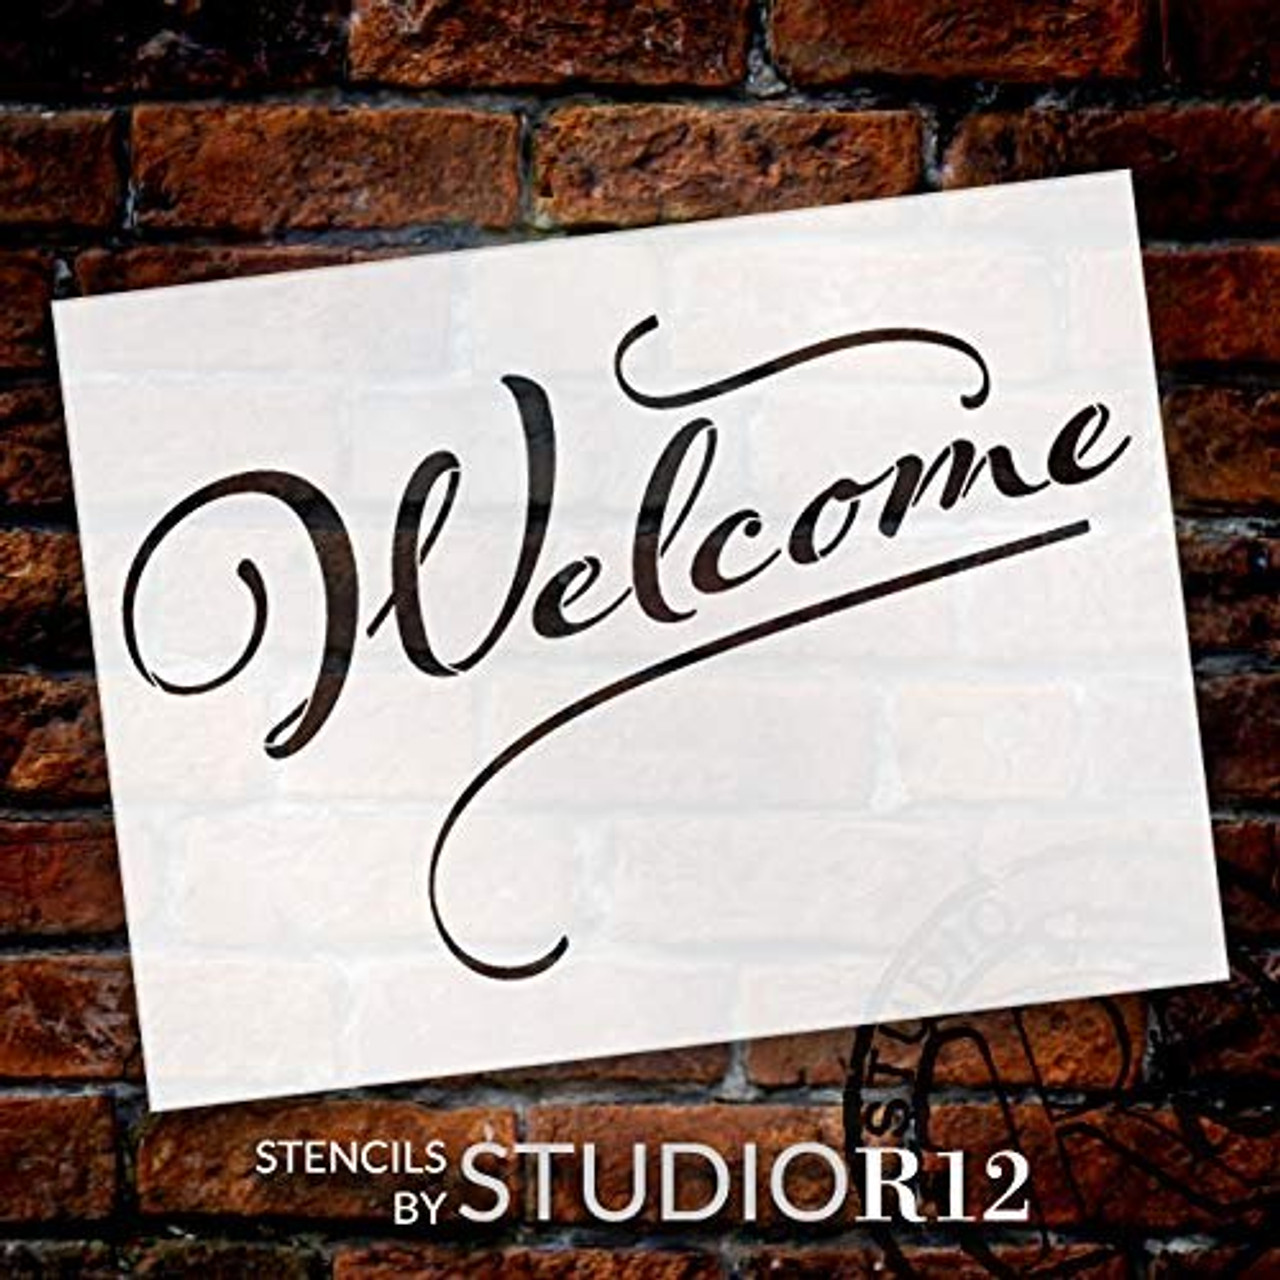 Welcome Sign Stencil by StudioR12 Reusable Mylar Template Use to Paint Wood Signs - Front Porch - Pallets - New Home - DIY Home Decor - Select Size